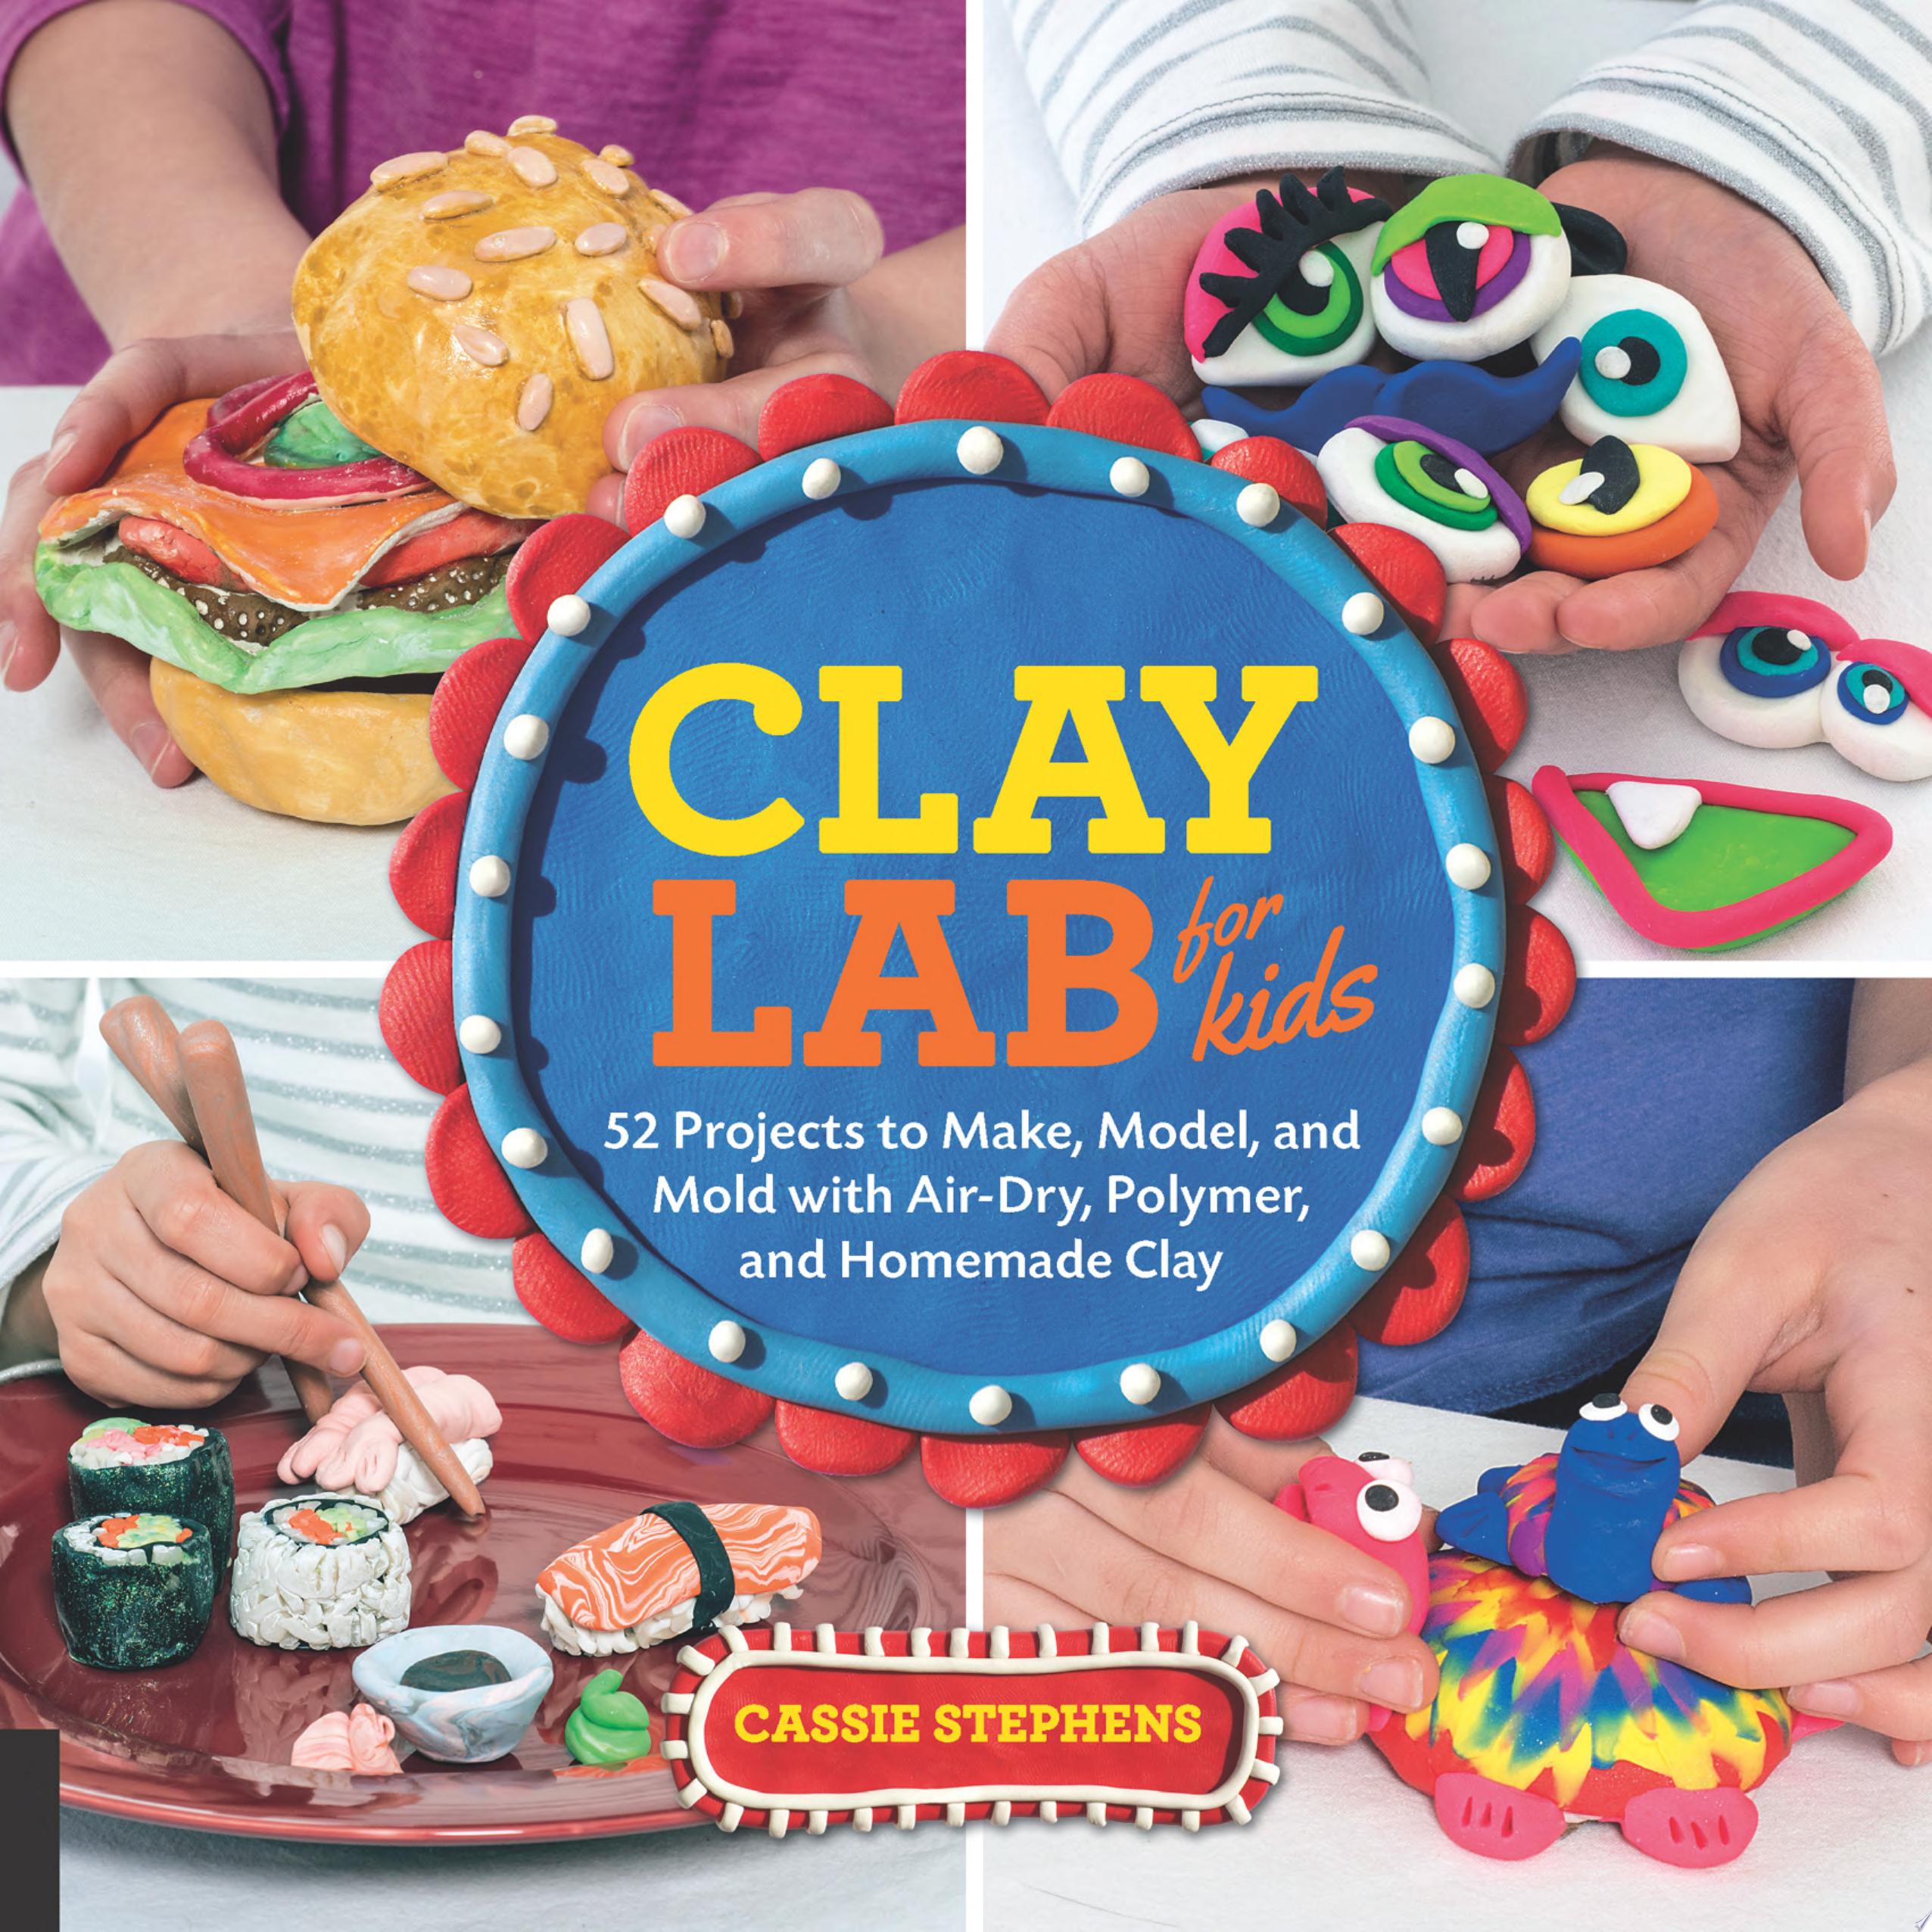 Image for "Clay Lab for Kids"